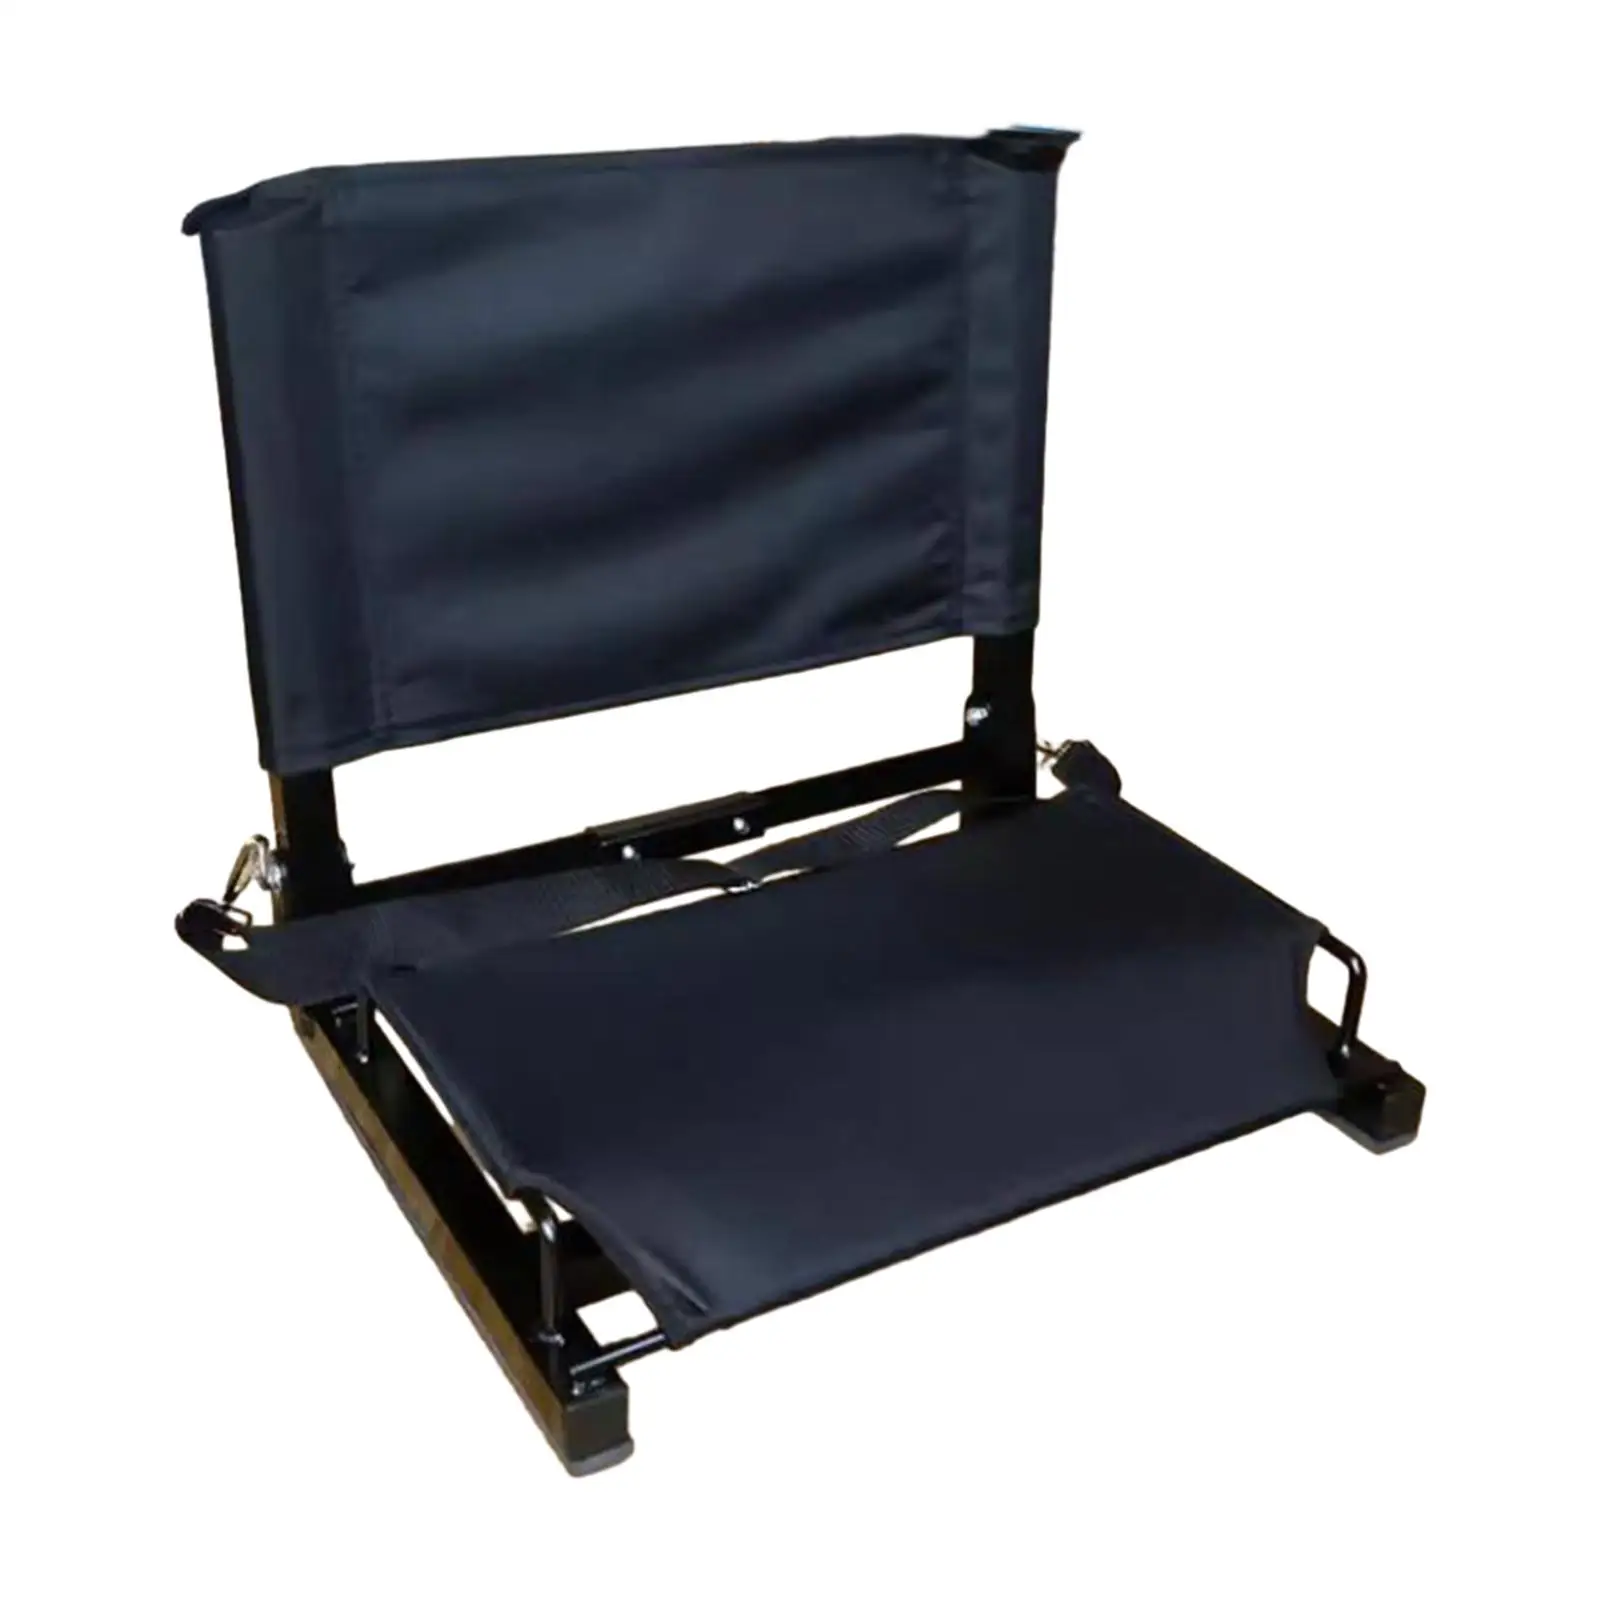 Bleacher Chair Stadium Chair with Back Support Bench Chair Stadium Seat Bleacher Seating for Sporting Events Hiking Fishing